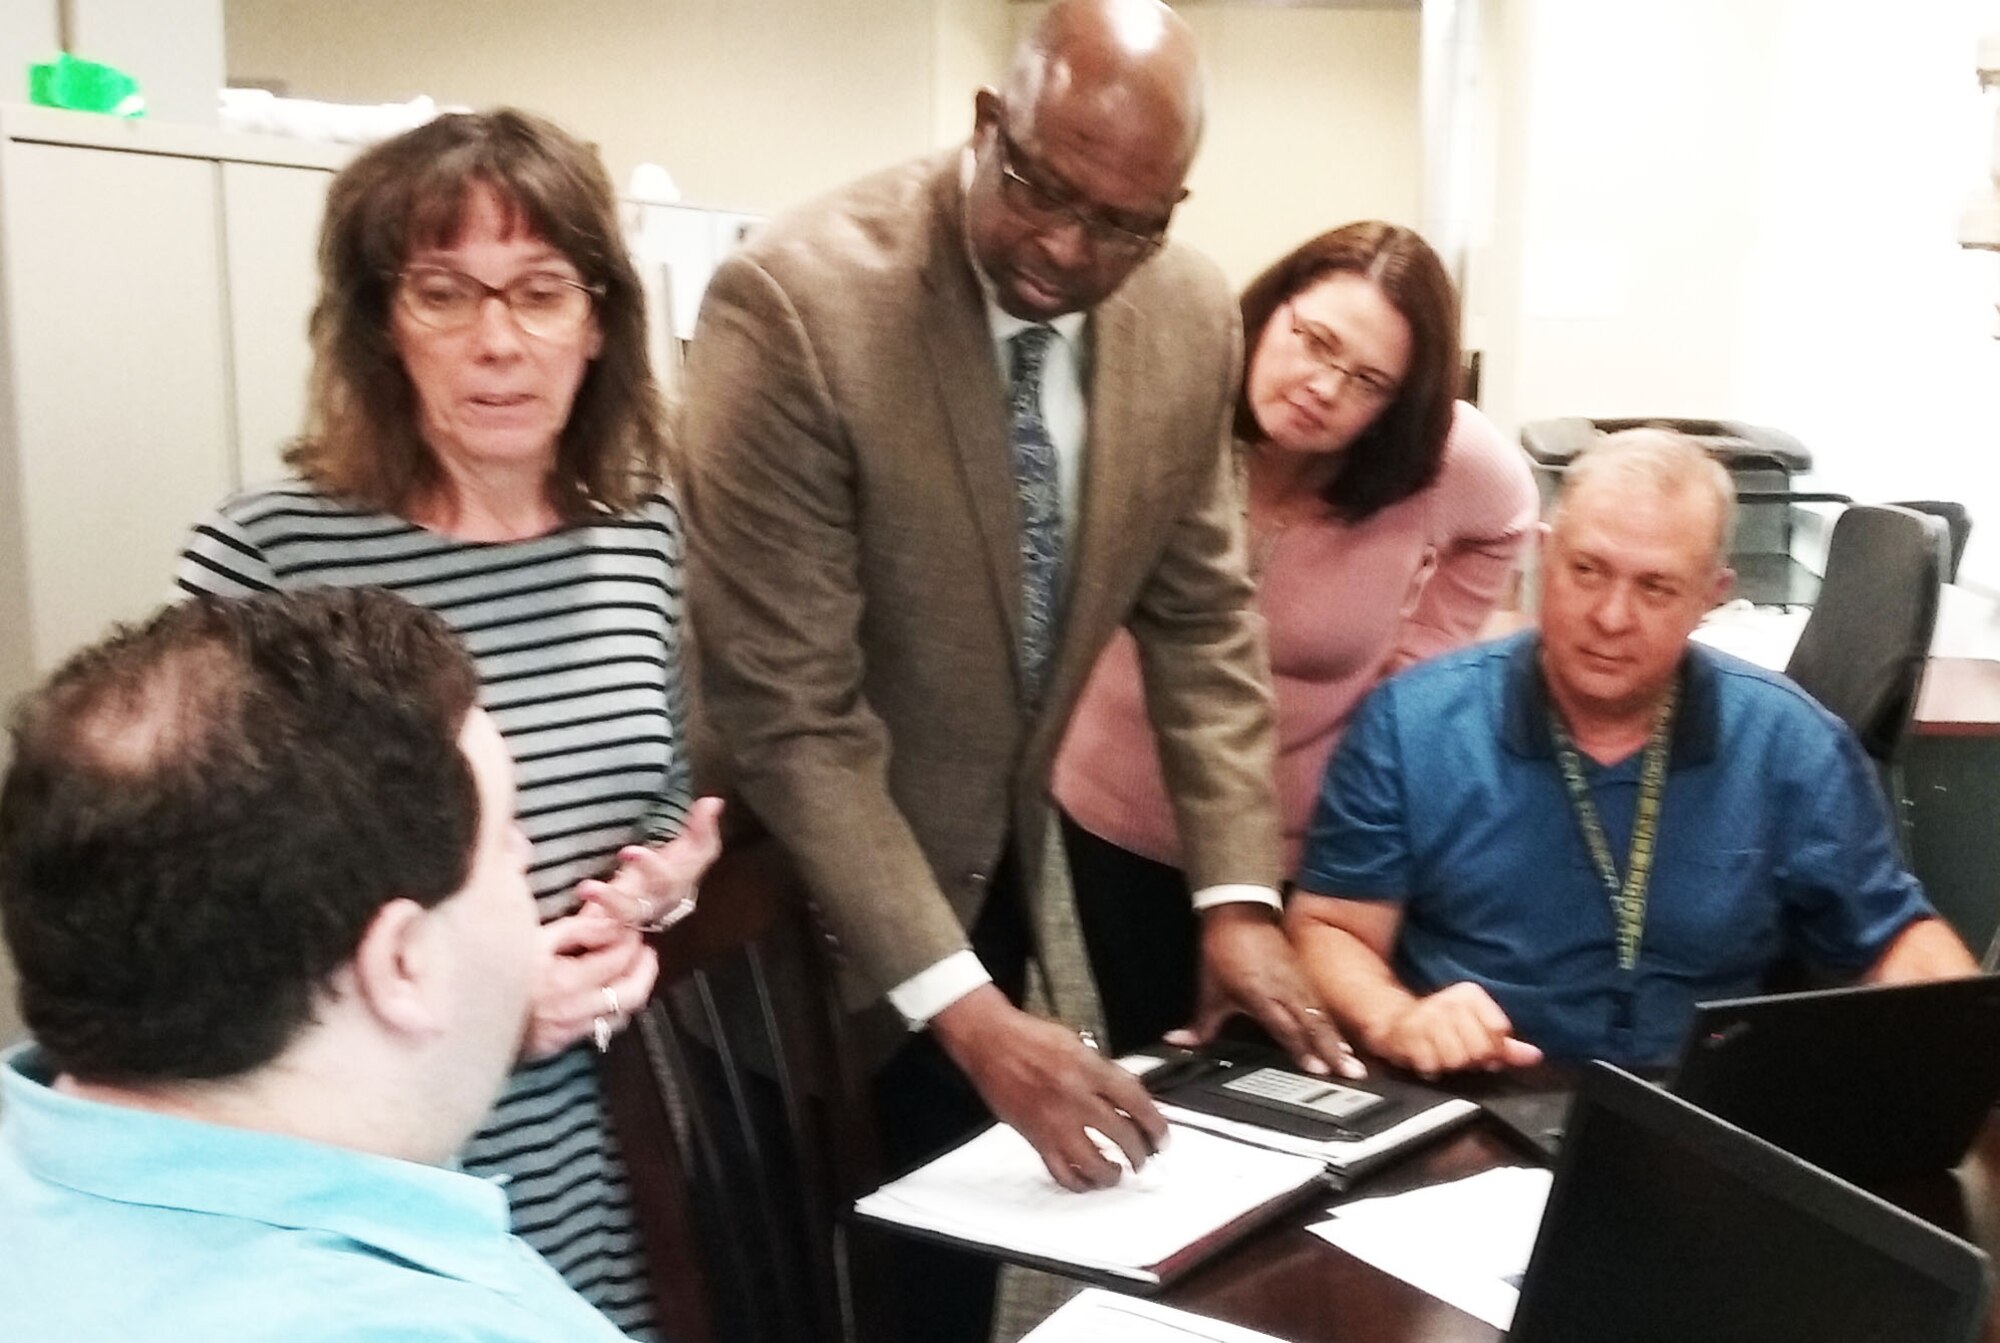 Members of AFIMSC's Financial Operations Division discuss a plan for certifying the time cards of nearly 700 Tyndall Air Force Base employees affected by Hurricane Michael. From left to right, Jason Schneider, Linda Alcala, Charles Hendricks, Ellen Lounsberry, and Rick Baltes. (U.S. Air Force Photo by Ed Shannon)